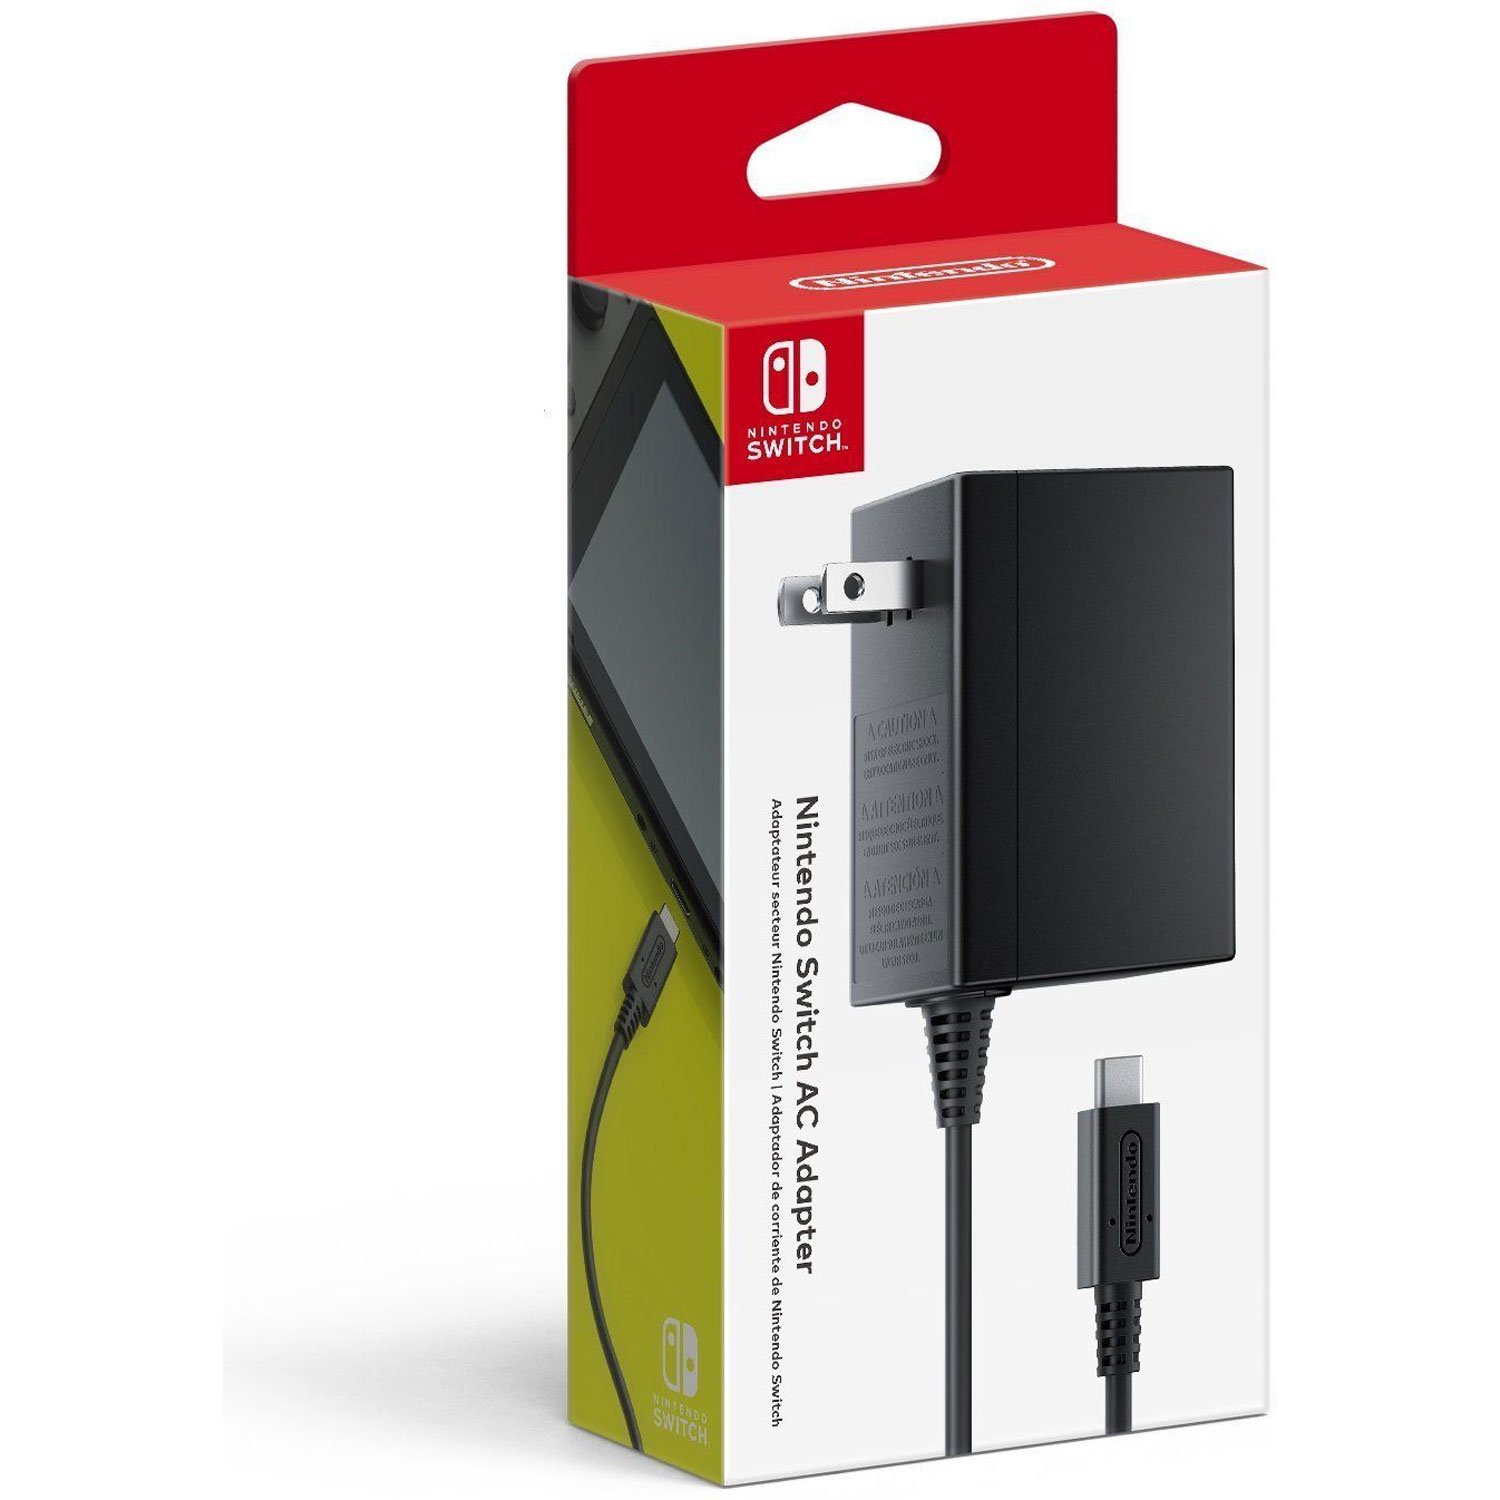 Nintendo Switch AC Adapter About this item Plug in the AC adapter and power your Nintendo Switch system from any 120 vo